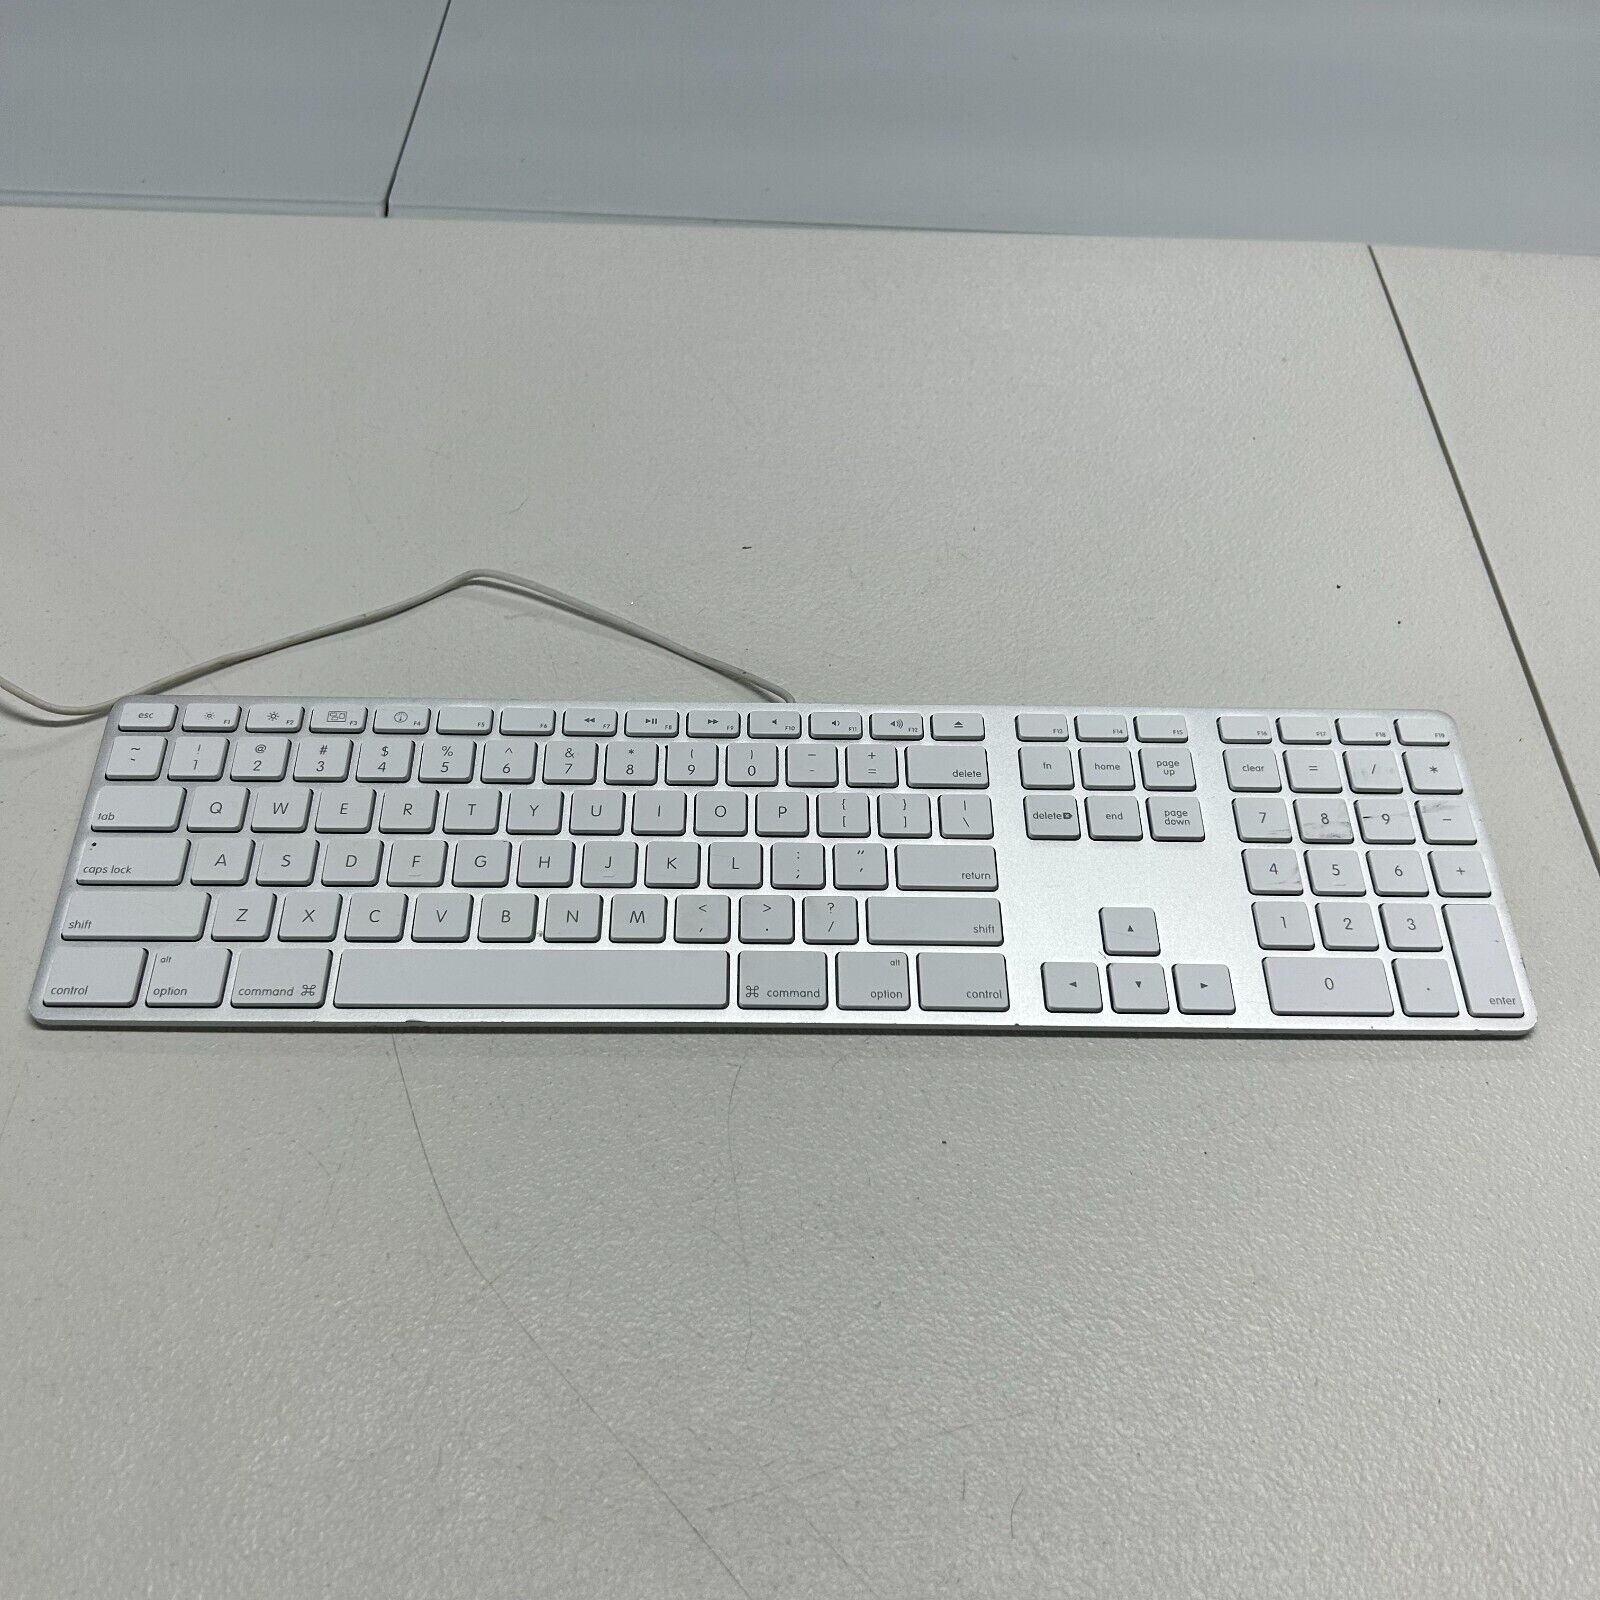 Apple A1243 Extended Wired Numeric Keyboard for iMac - TESTED